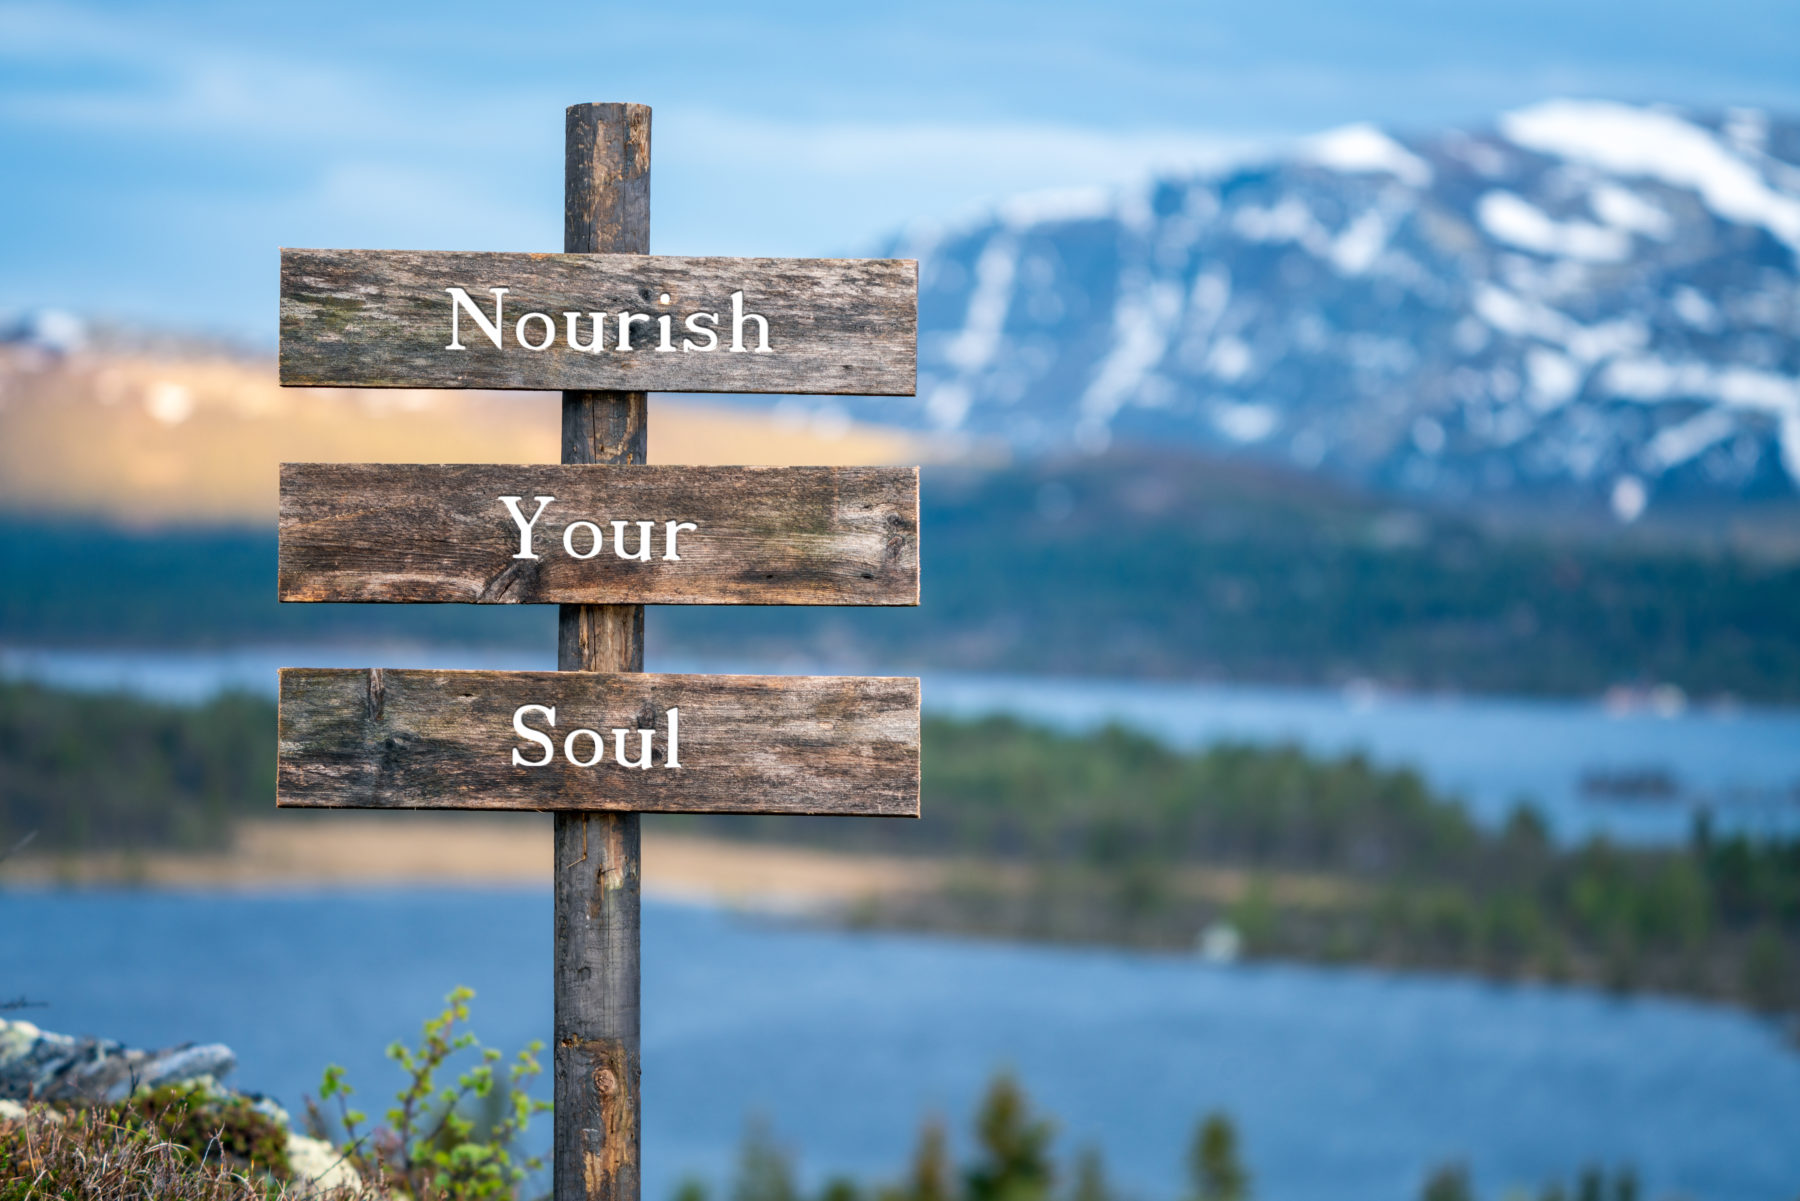 nourish your soul text on wooden signpost outdoors in landscape scenery during blue hour and sunset.